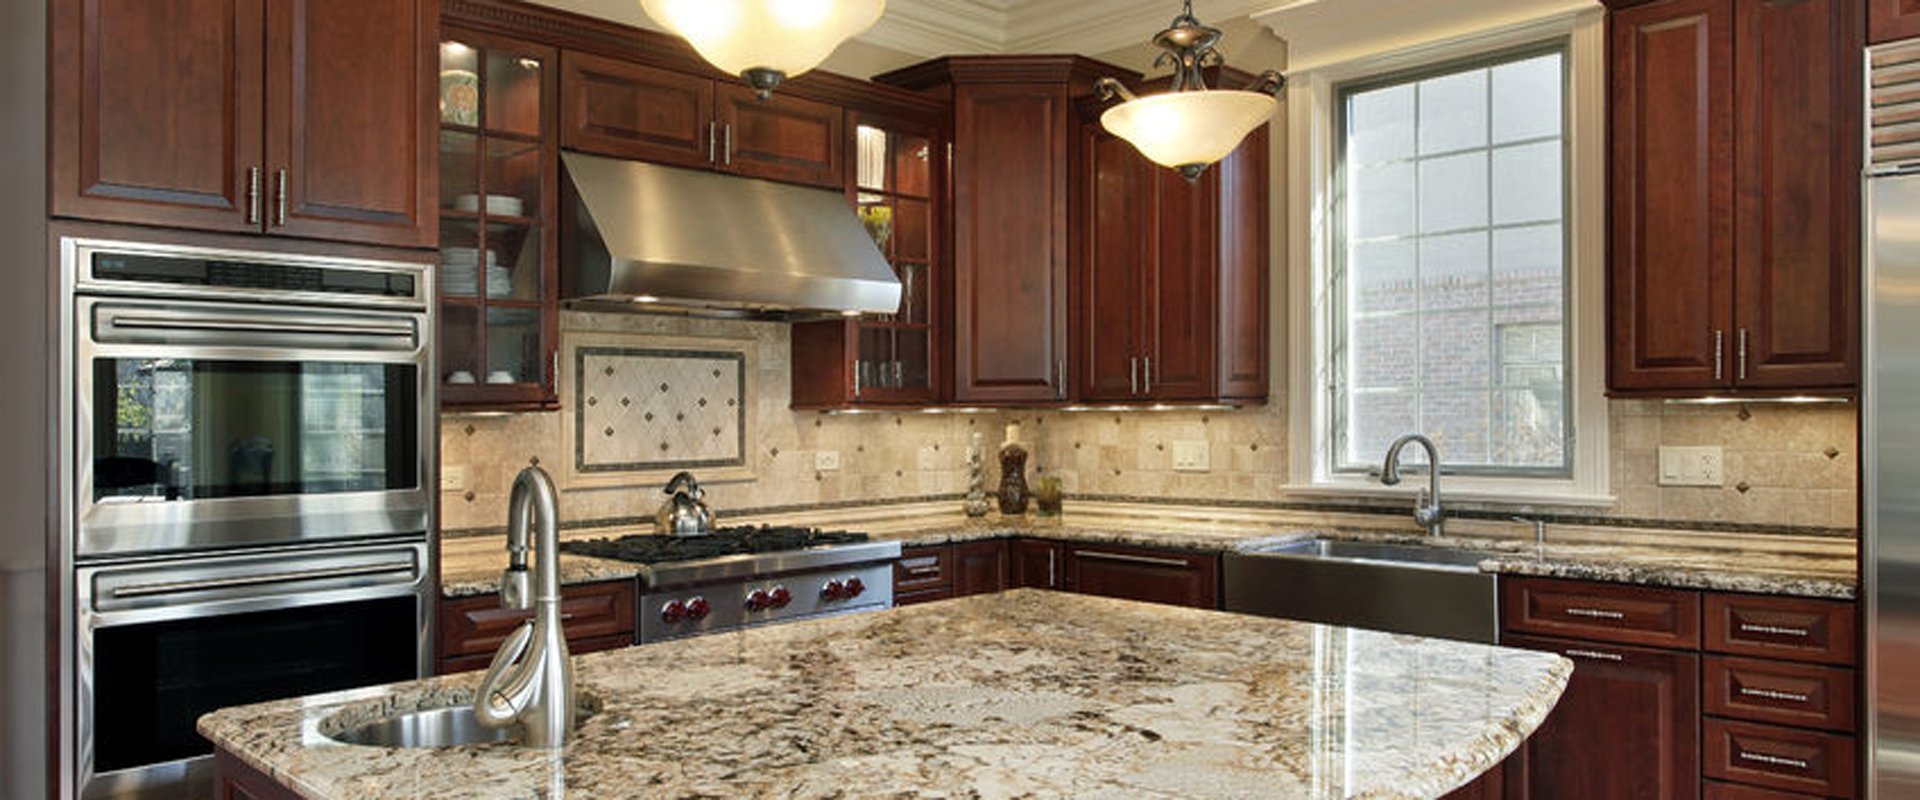 50031171 - kitchen with granite island and cherry wood cabinetry